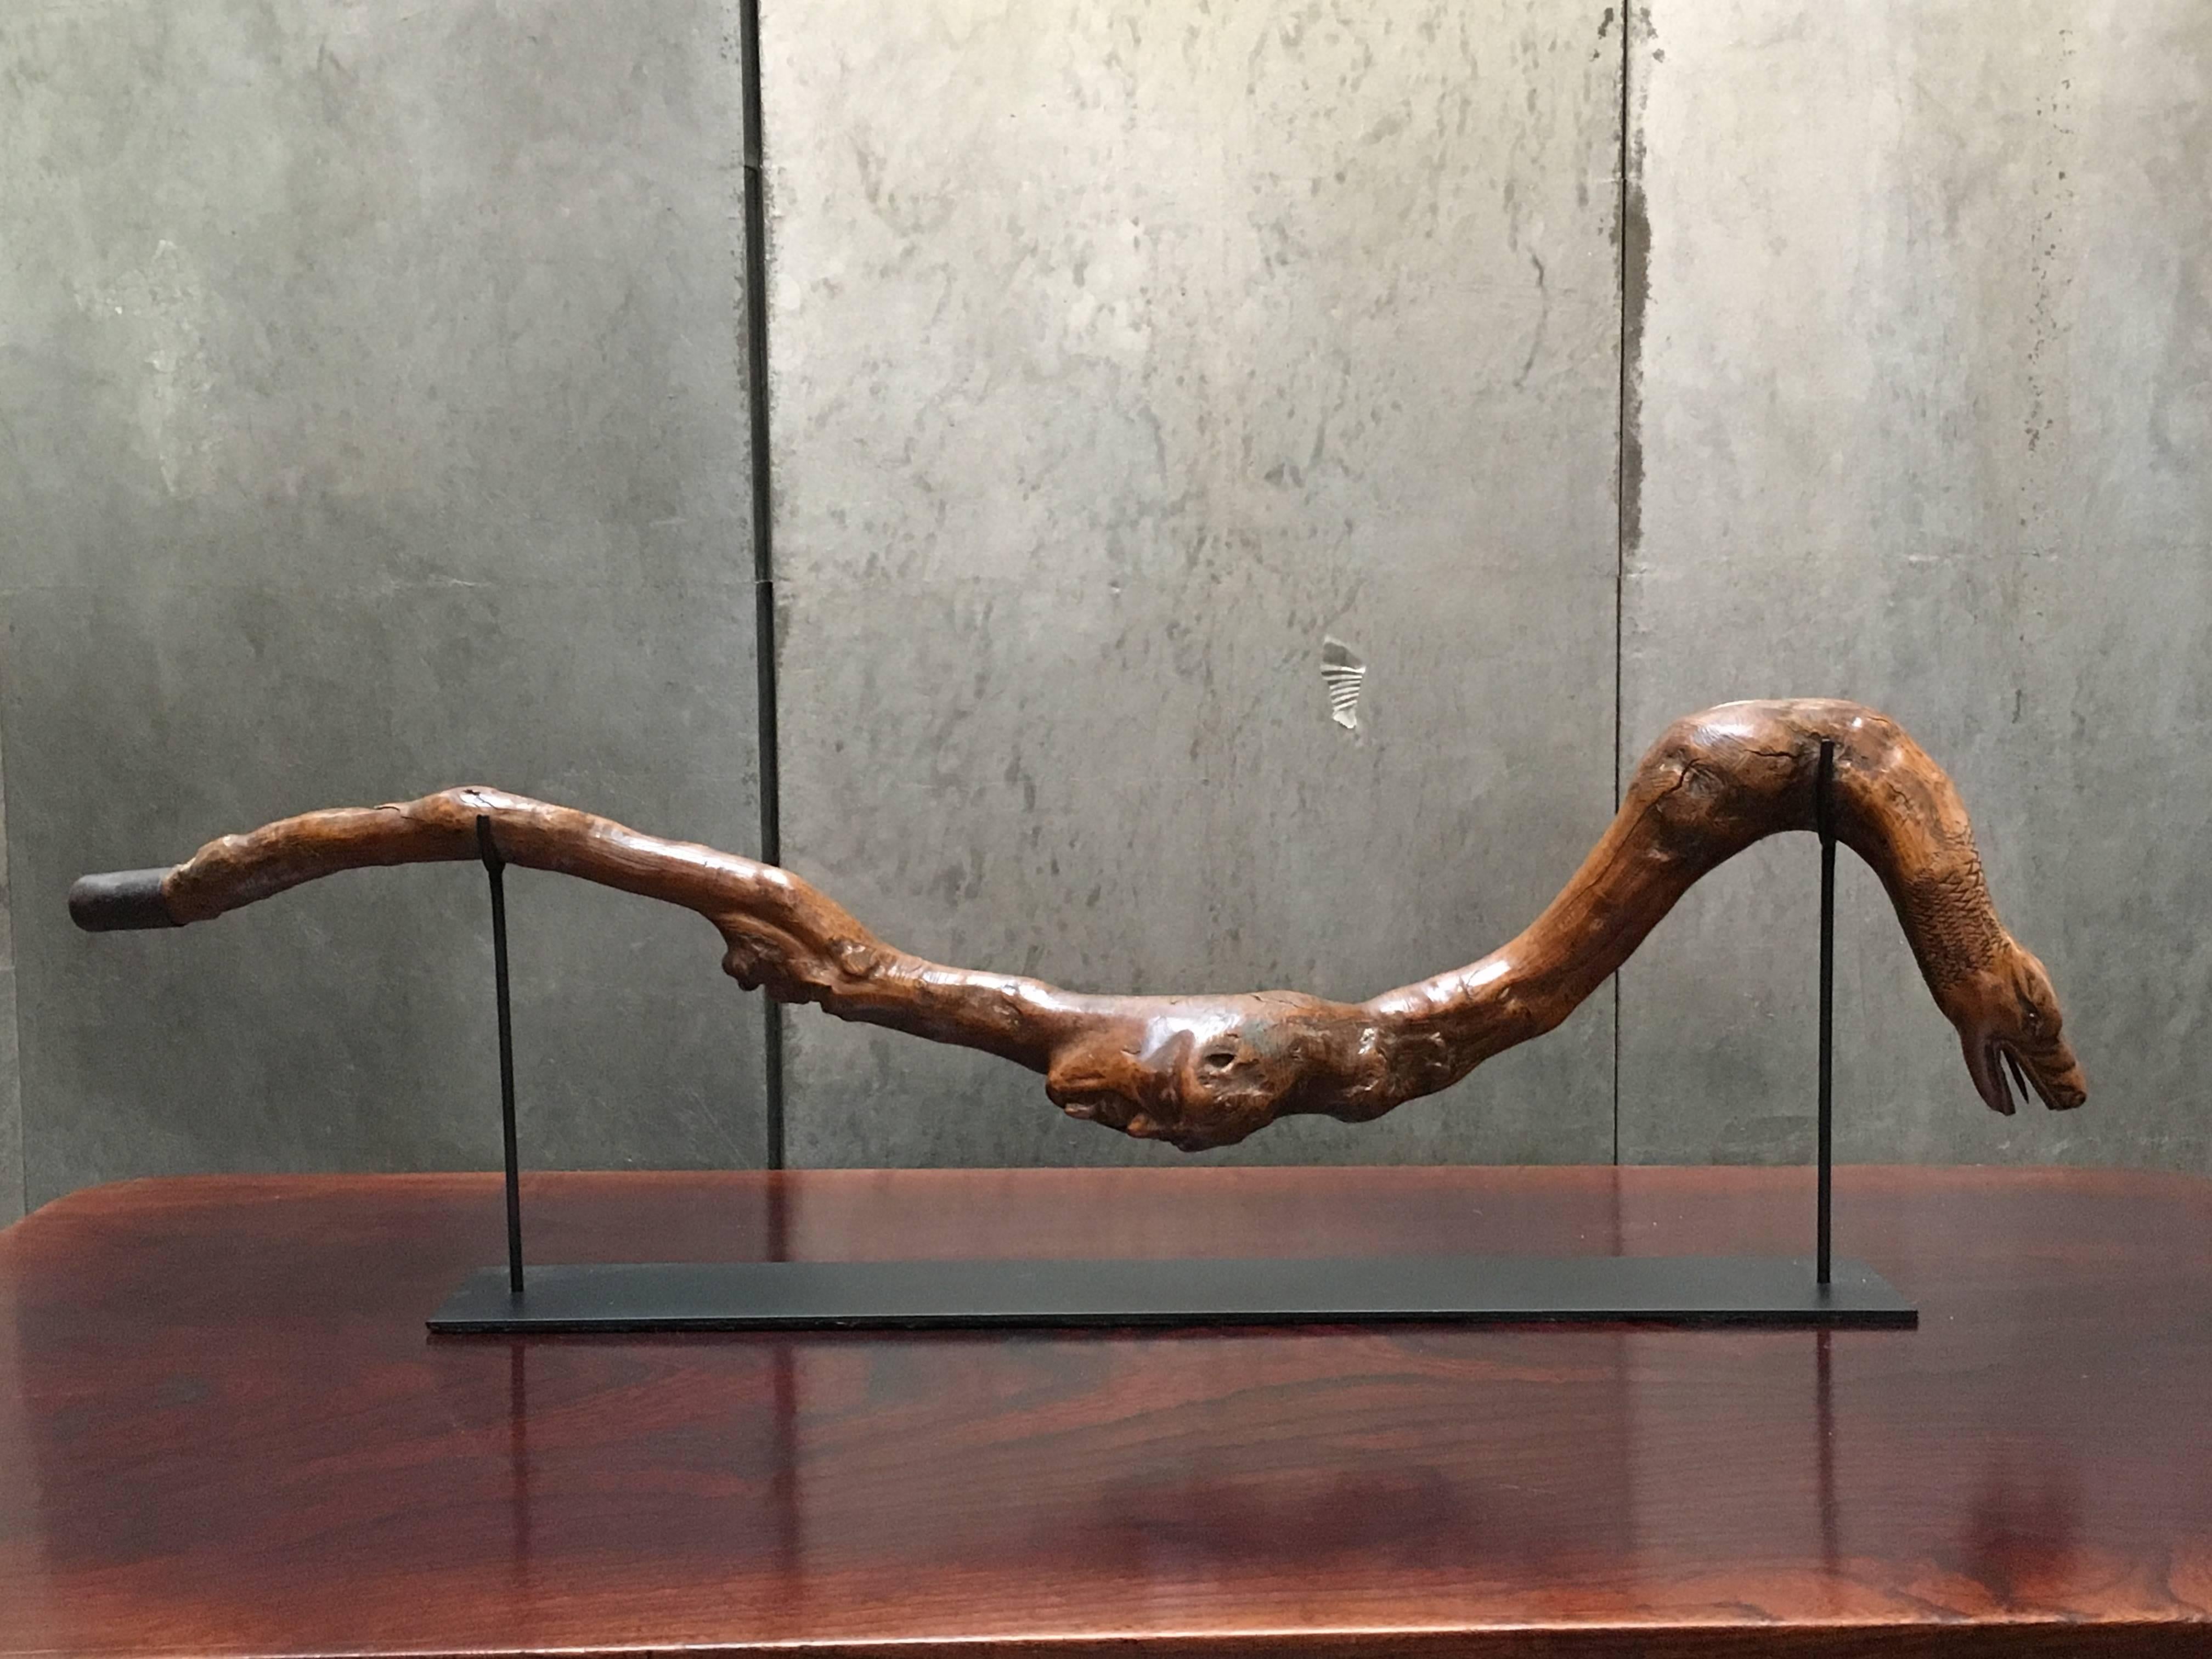 An intriguing early 20th century American folk carved walking stick, mounted as a sculpture.
Carved from a single section of gnarled hardwood in the form of a snake with two wood spirits to the body. The snake head carved masterfully with an open